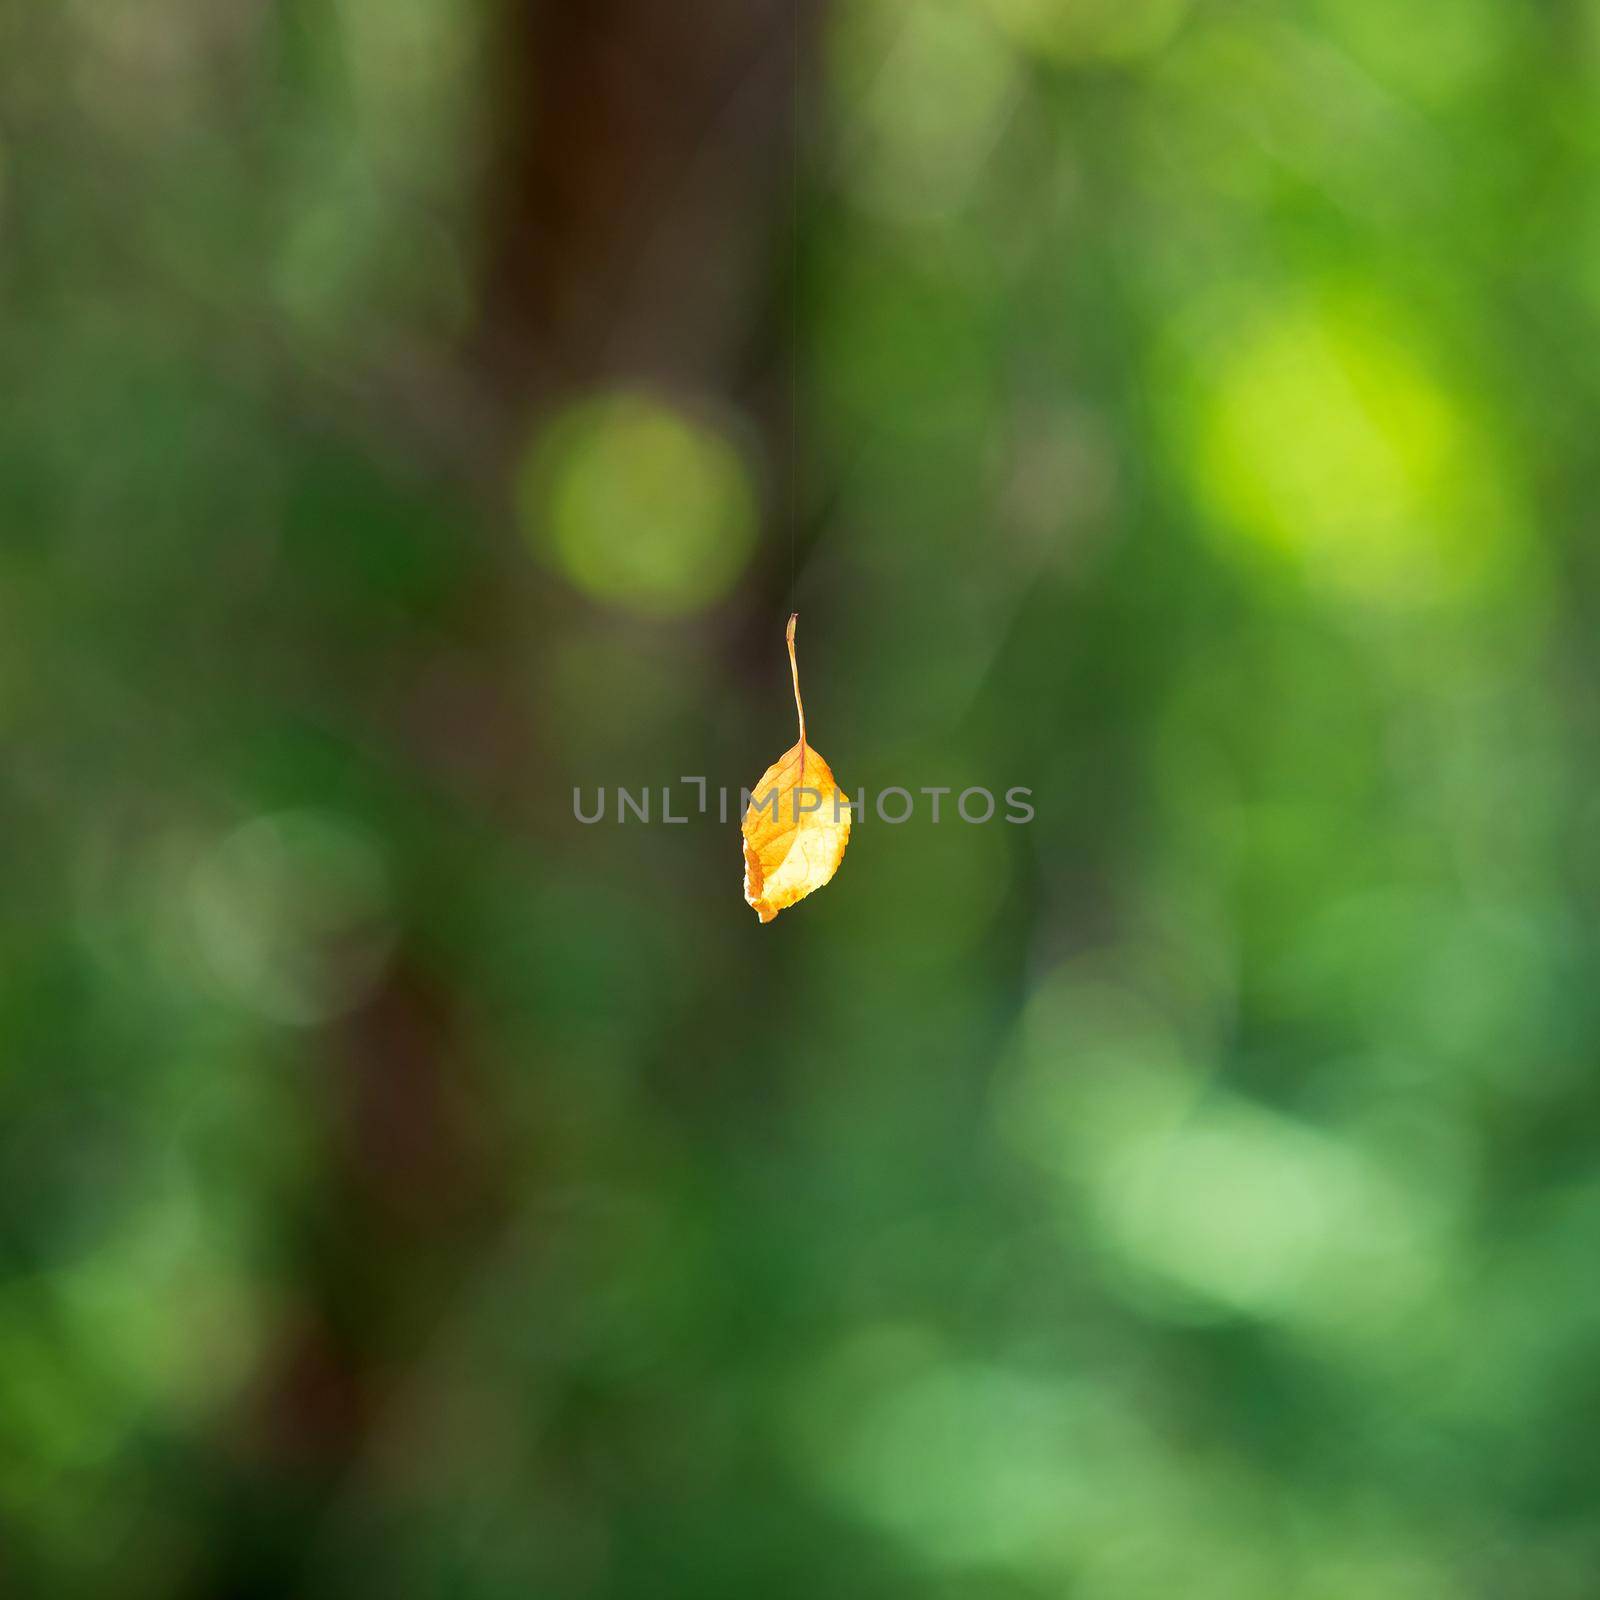 Dried yellow leaf hanging in the air on the spider's web by Nobilior